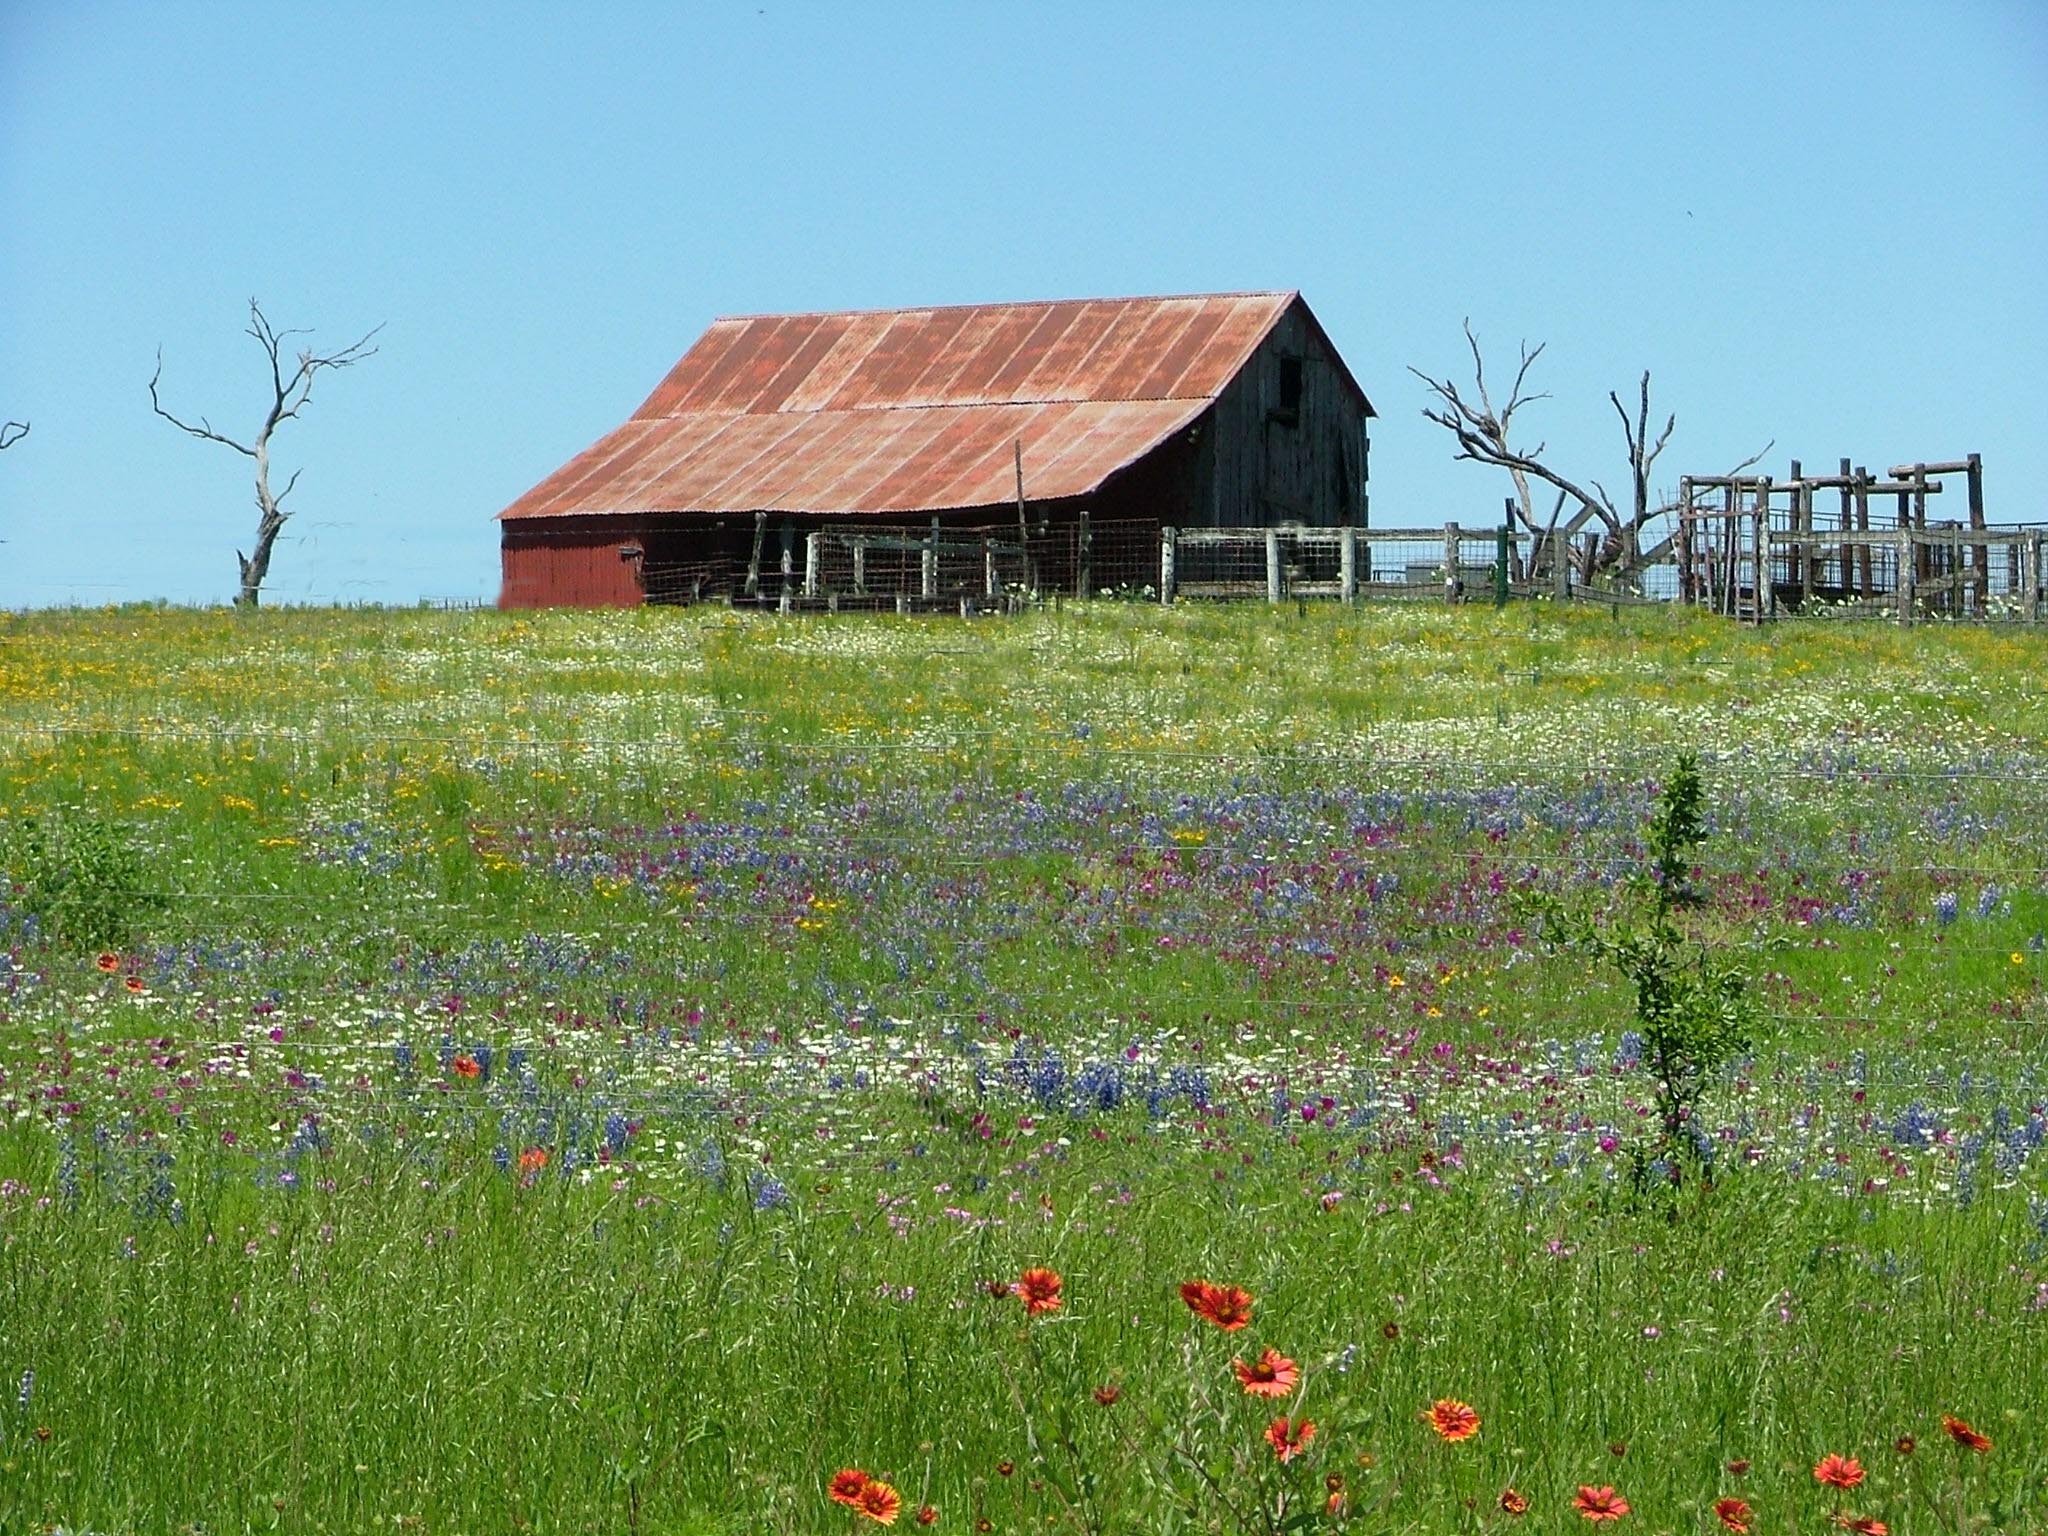 Texas Hill Country Barn In Wildflowers Rustic Image Foundmyself